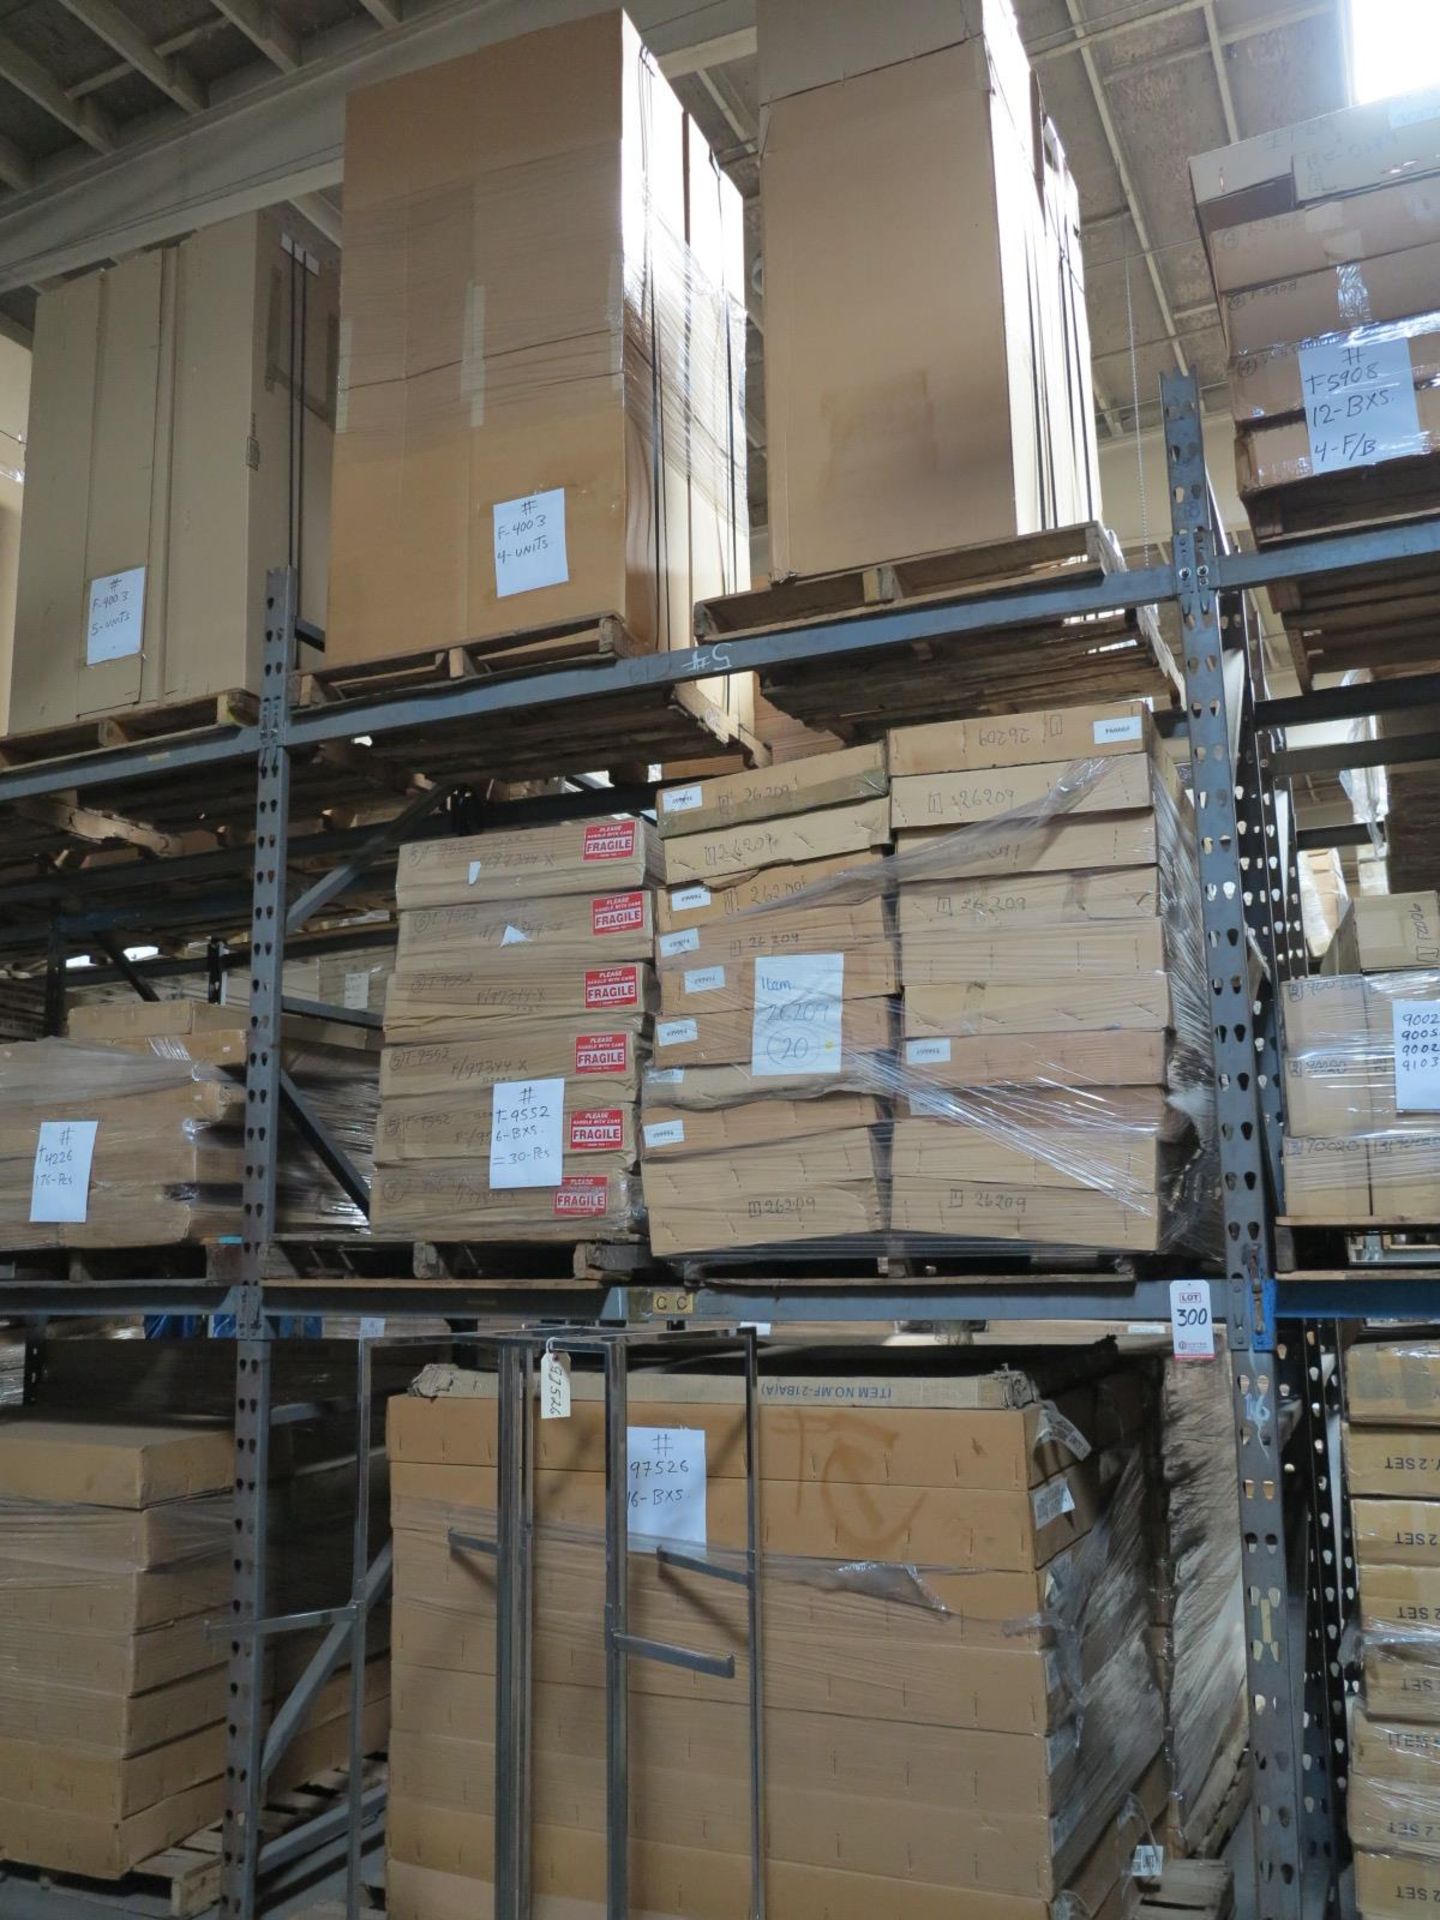 LOT - CONTENTS OF (3) SECTIONS OF PALLET RACK TO INCLUDE: ITEM # 26209, 2 WAY W (2) 15" STR. ARMS,